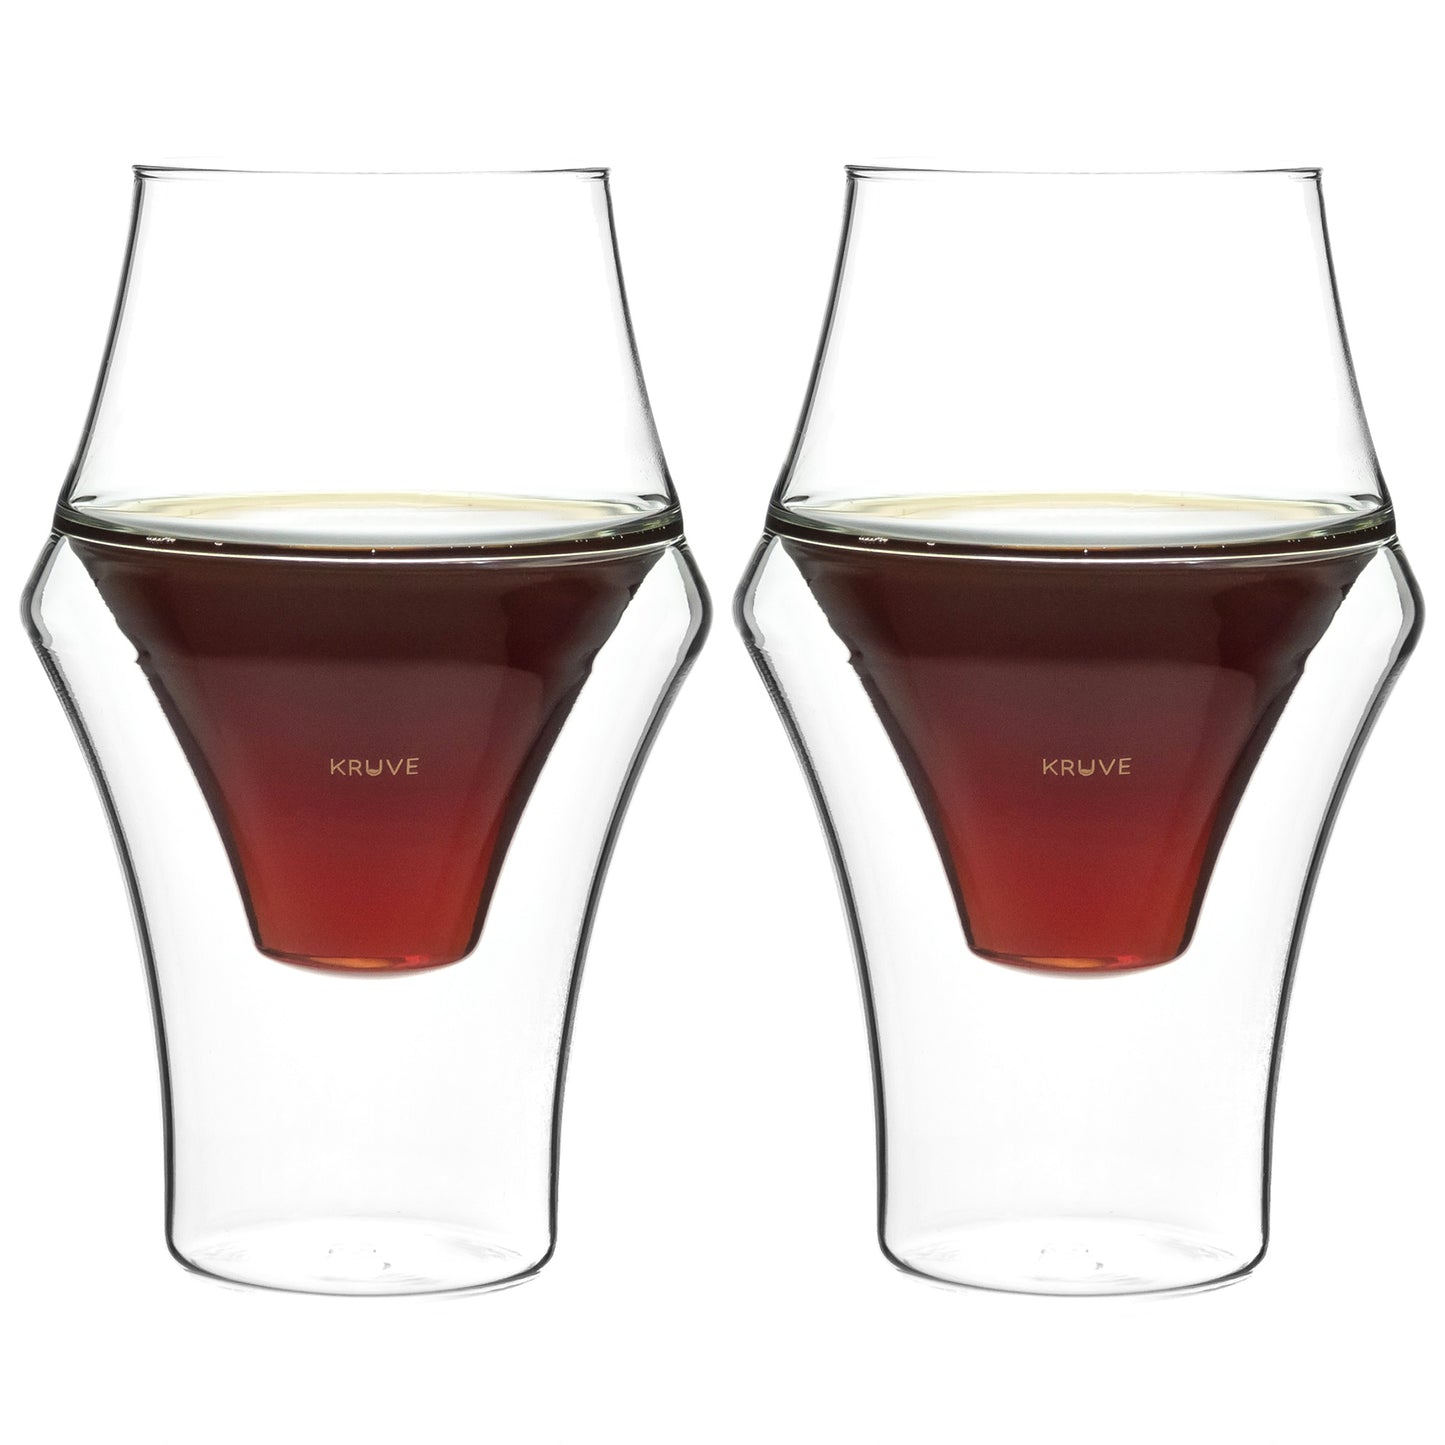 Kruve EQ Speciality Coffee Glass Set - Inspire and Excite